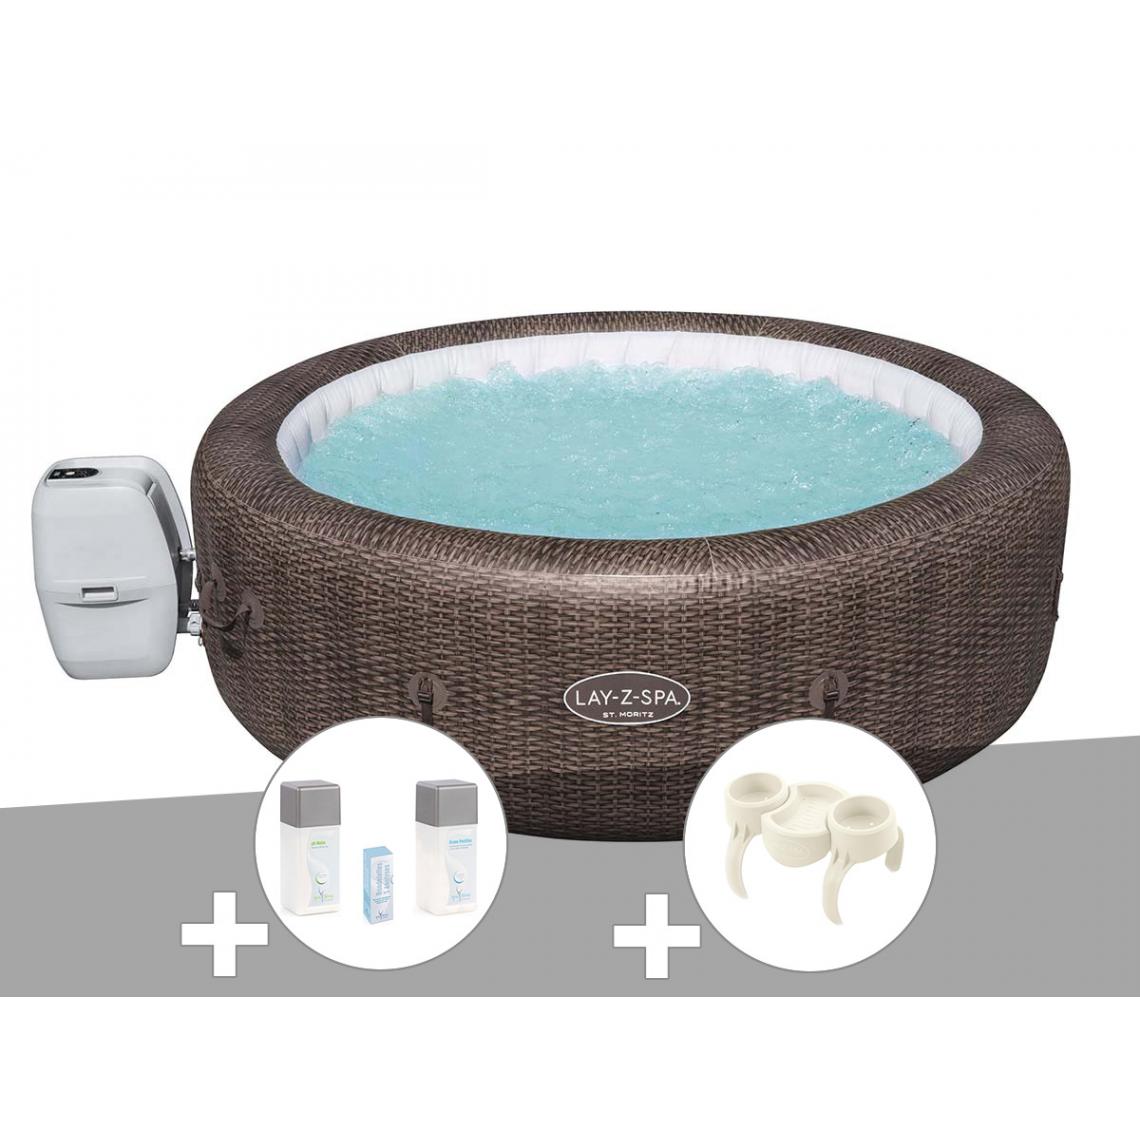 Bestway - Kit spa gonflable Bestway Lay-Z-Spa St Moritz rond Airjet 5/7 places + Kit traitement brome + Porte-gobelets - Spa gonflable